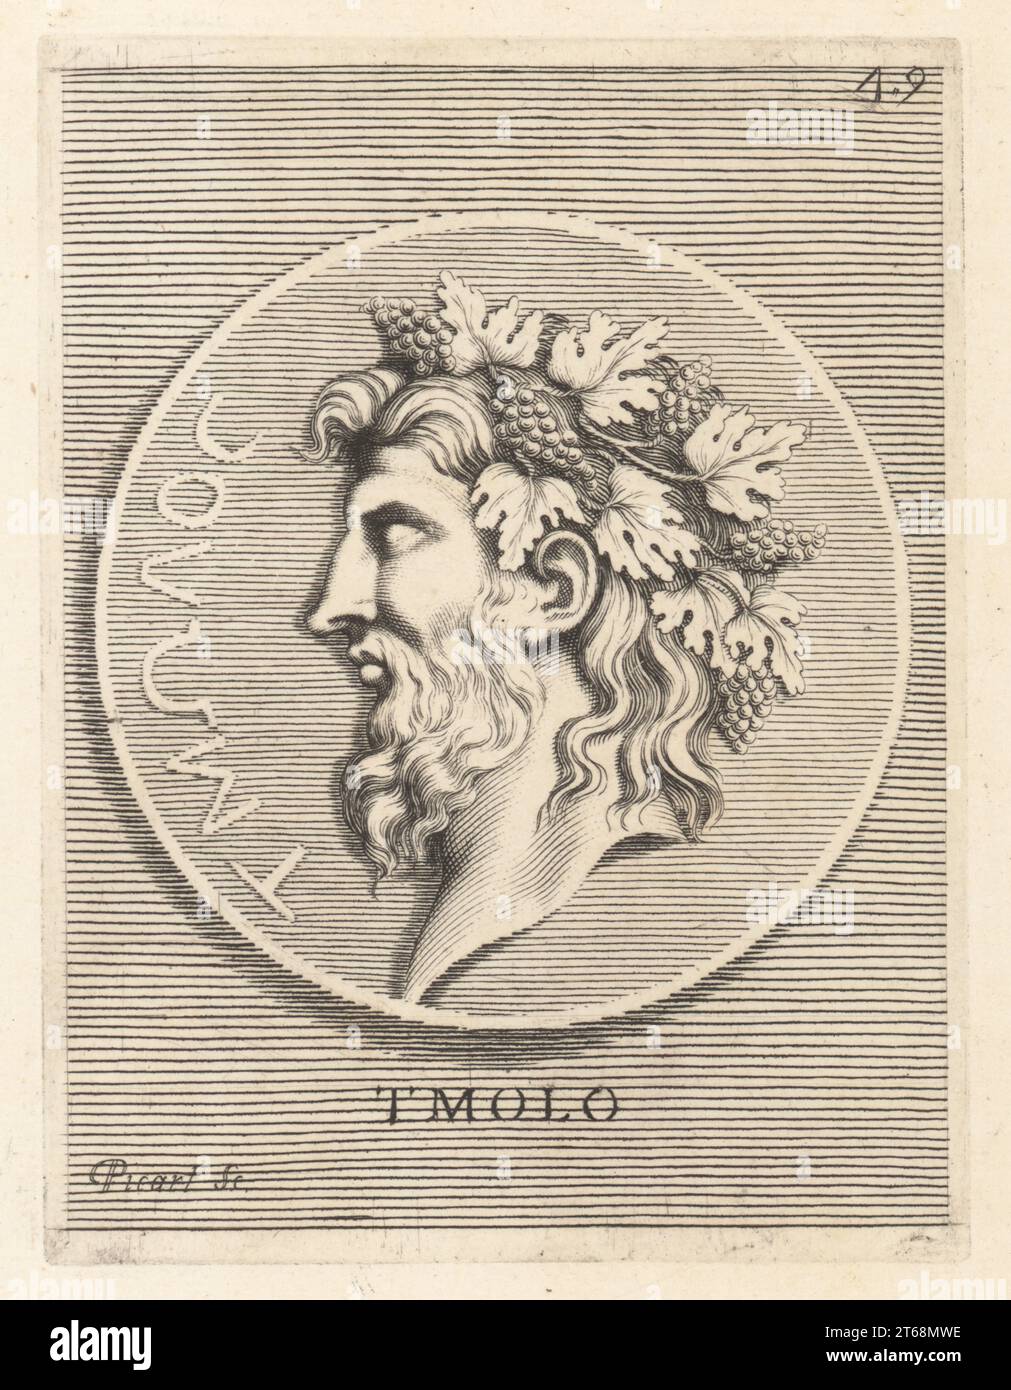 Tmolus, mythical Greek king of Lydia, husband of Omphale, and/or father of Tantalus. Bearded head crowned with vine leaves and grapes. From a bronze coin owned by Cardinal Camillo Massimo. Tmolo. Copperplate engraving by Etienne Picart after Giovanni Angelo Canini from Iconografia, cioe disegni d'imagini de famosissimi monarchi, regi, filososi, poeti ed oratori dell' Antichita, Drawings of images of famous monarchs, kings, philosophers, poets and orators of Antiquity, Ignatio deLazari, Rome, 1699. Stock Photo